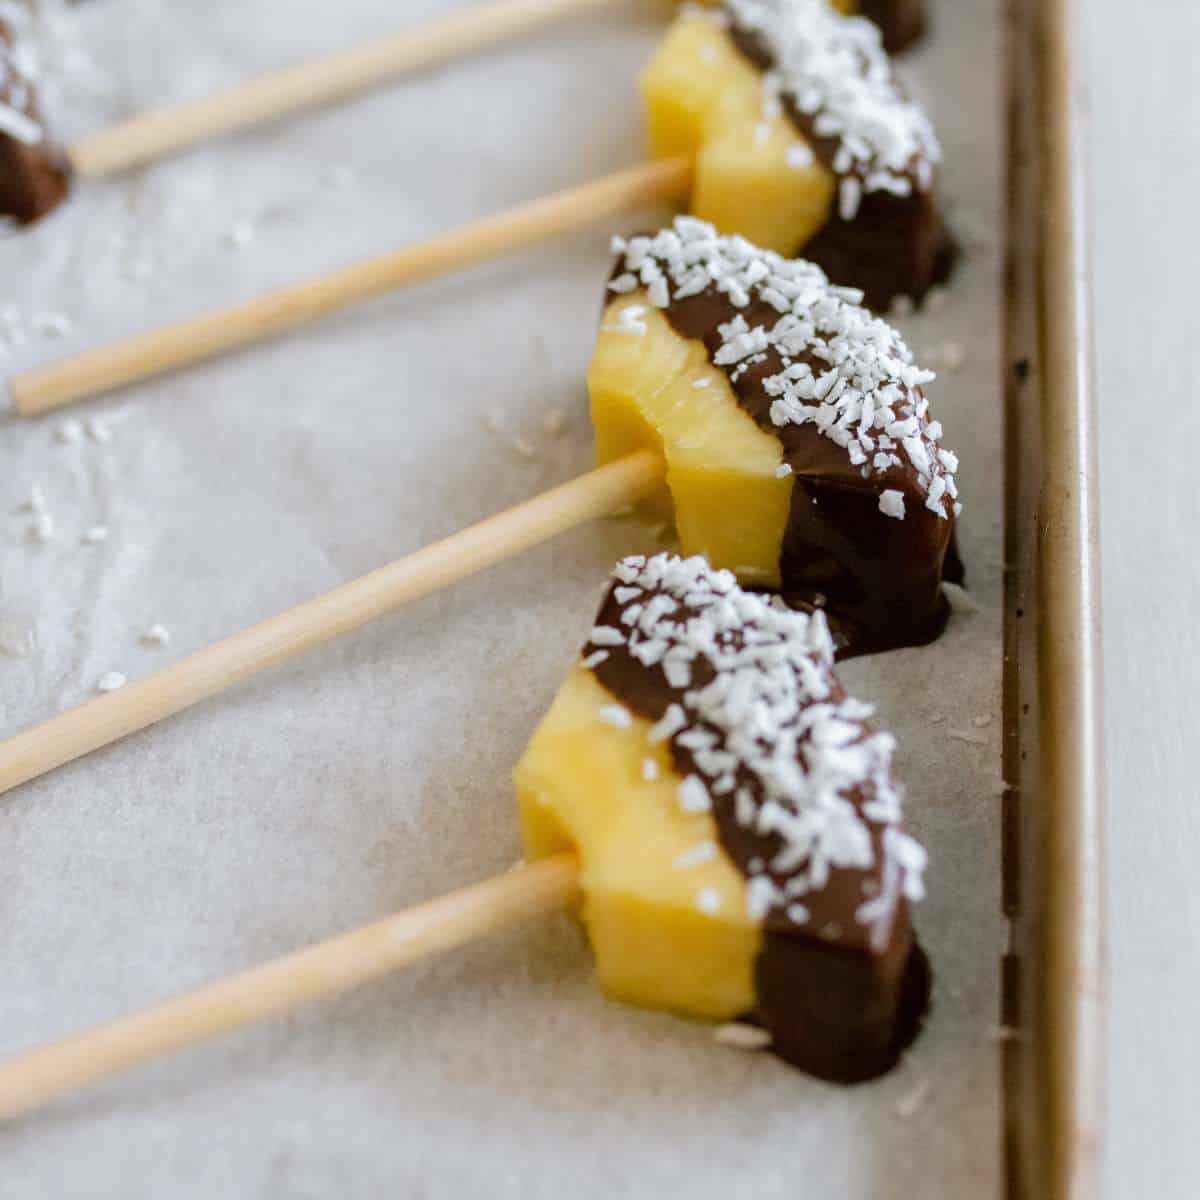 Chocolate covered pineapple dipped in shredded coconut on candy apples sticks laid on a baking sheet.